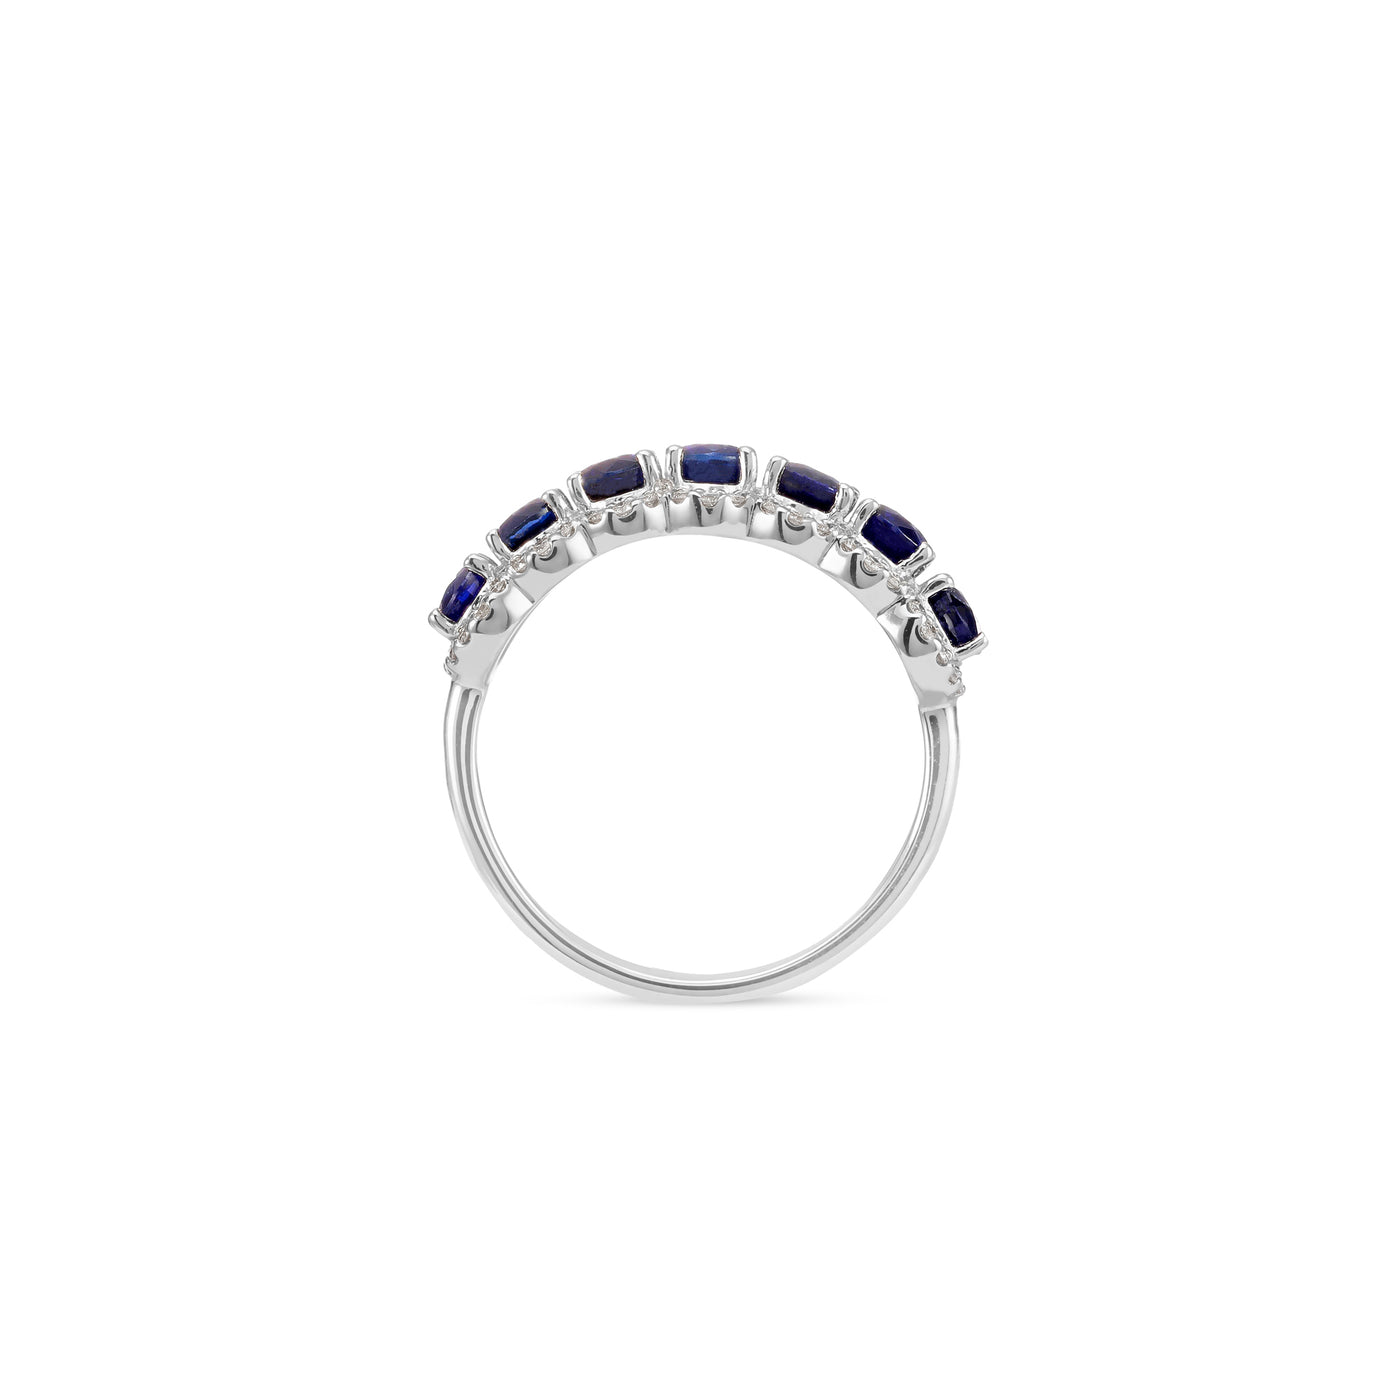 White Gold Diamond Ring With Natural Blue Sapphire